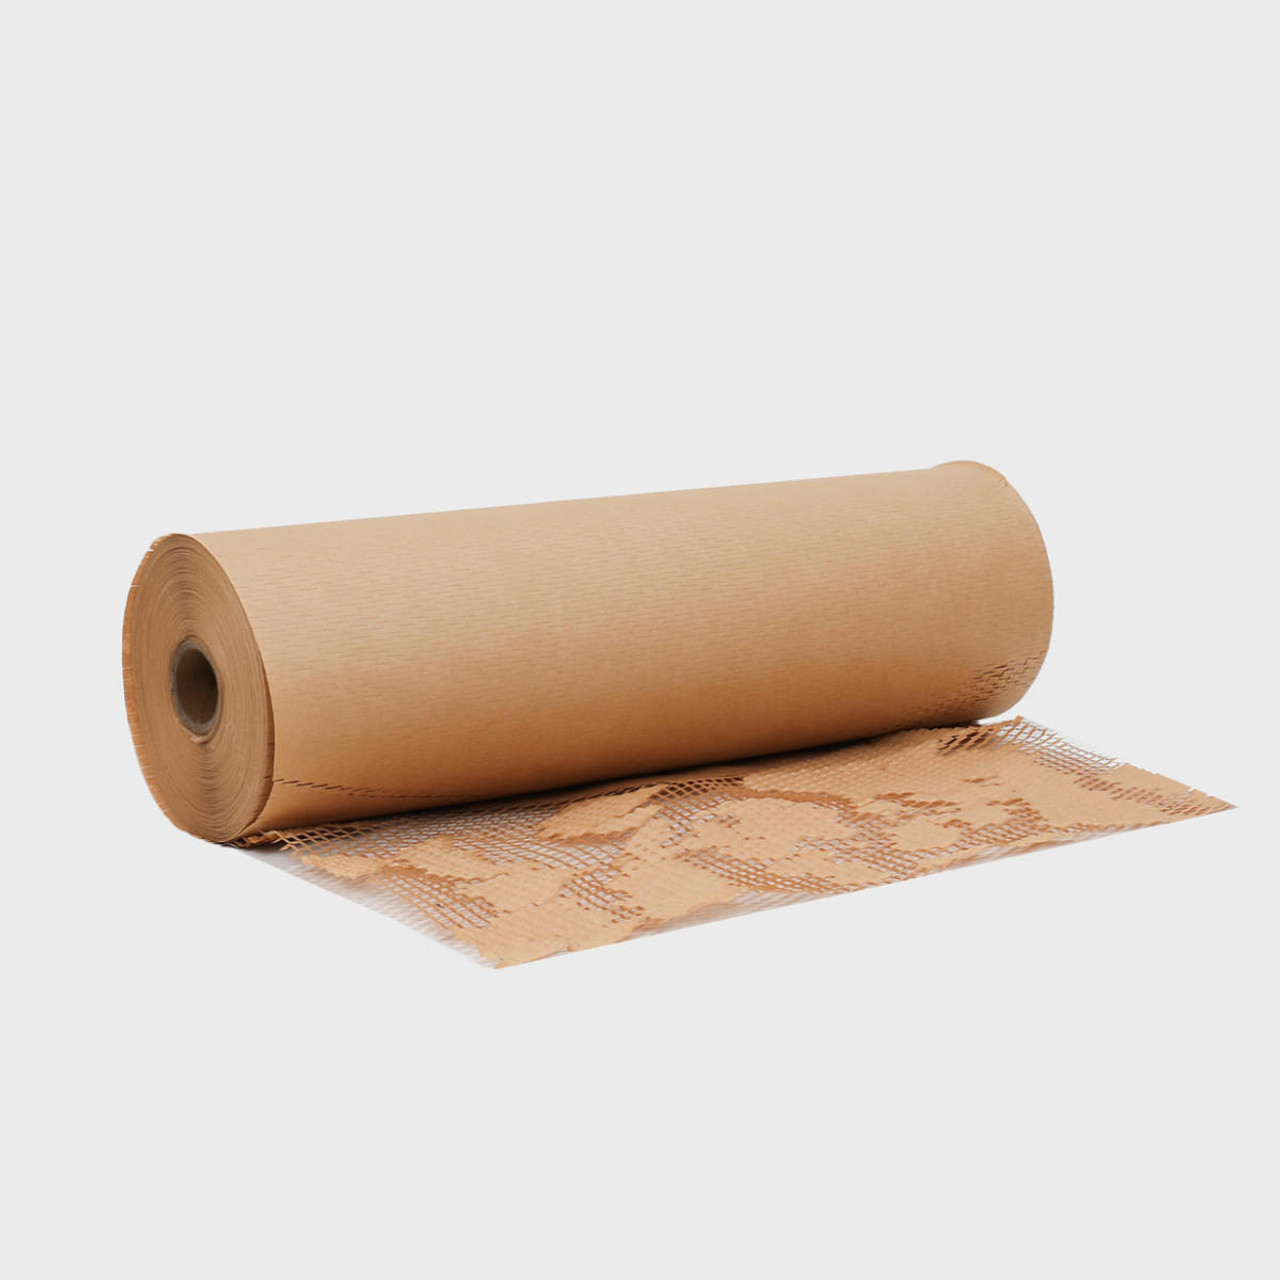 Honeycomb Protective Wrapping Paper 150M Roll | WBC.co.uk